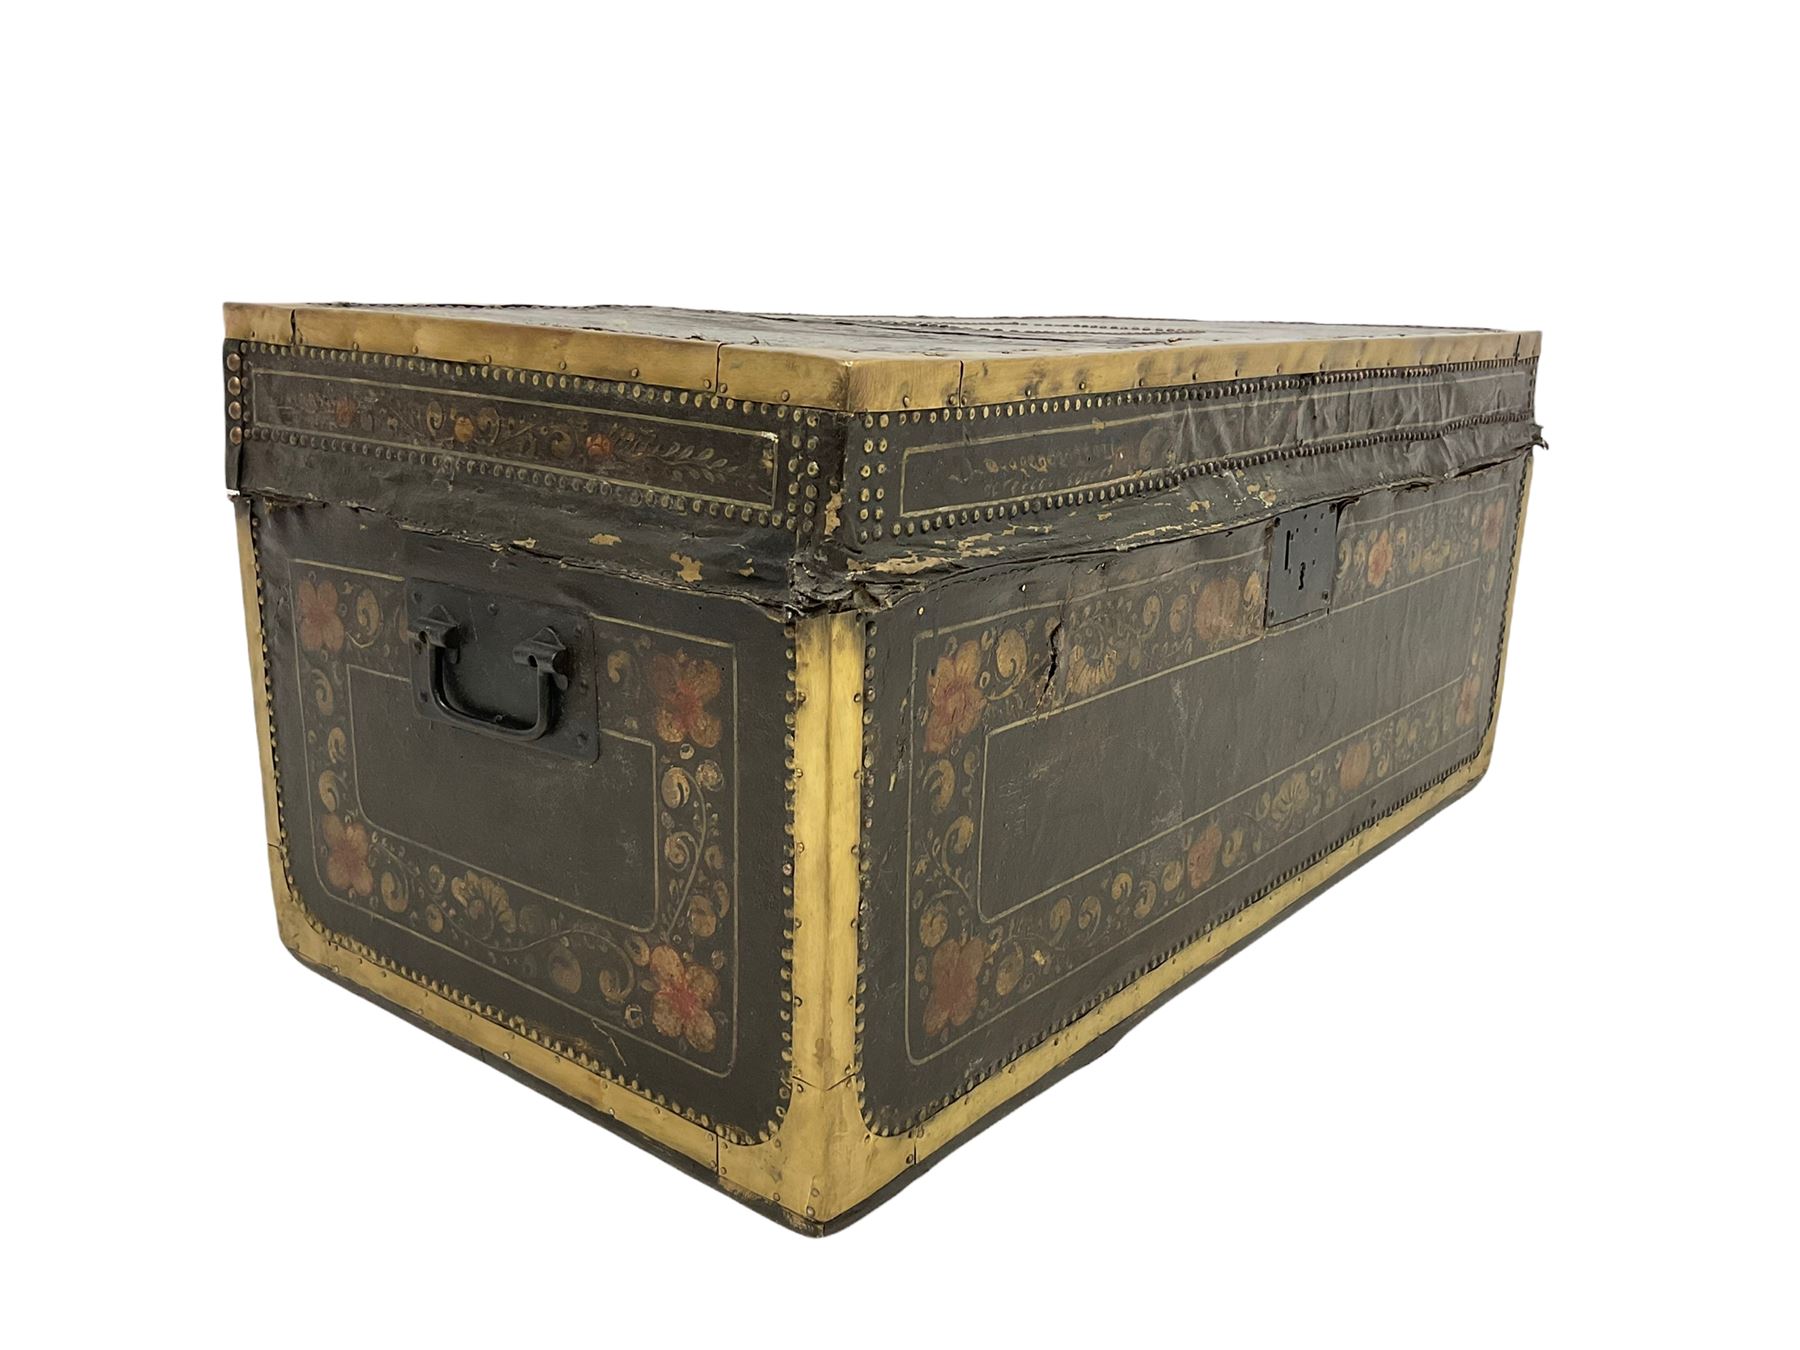 19th century Chinese export camphor wood chest - Image 3 of 7